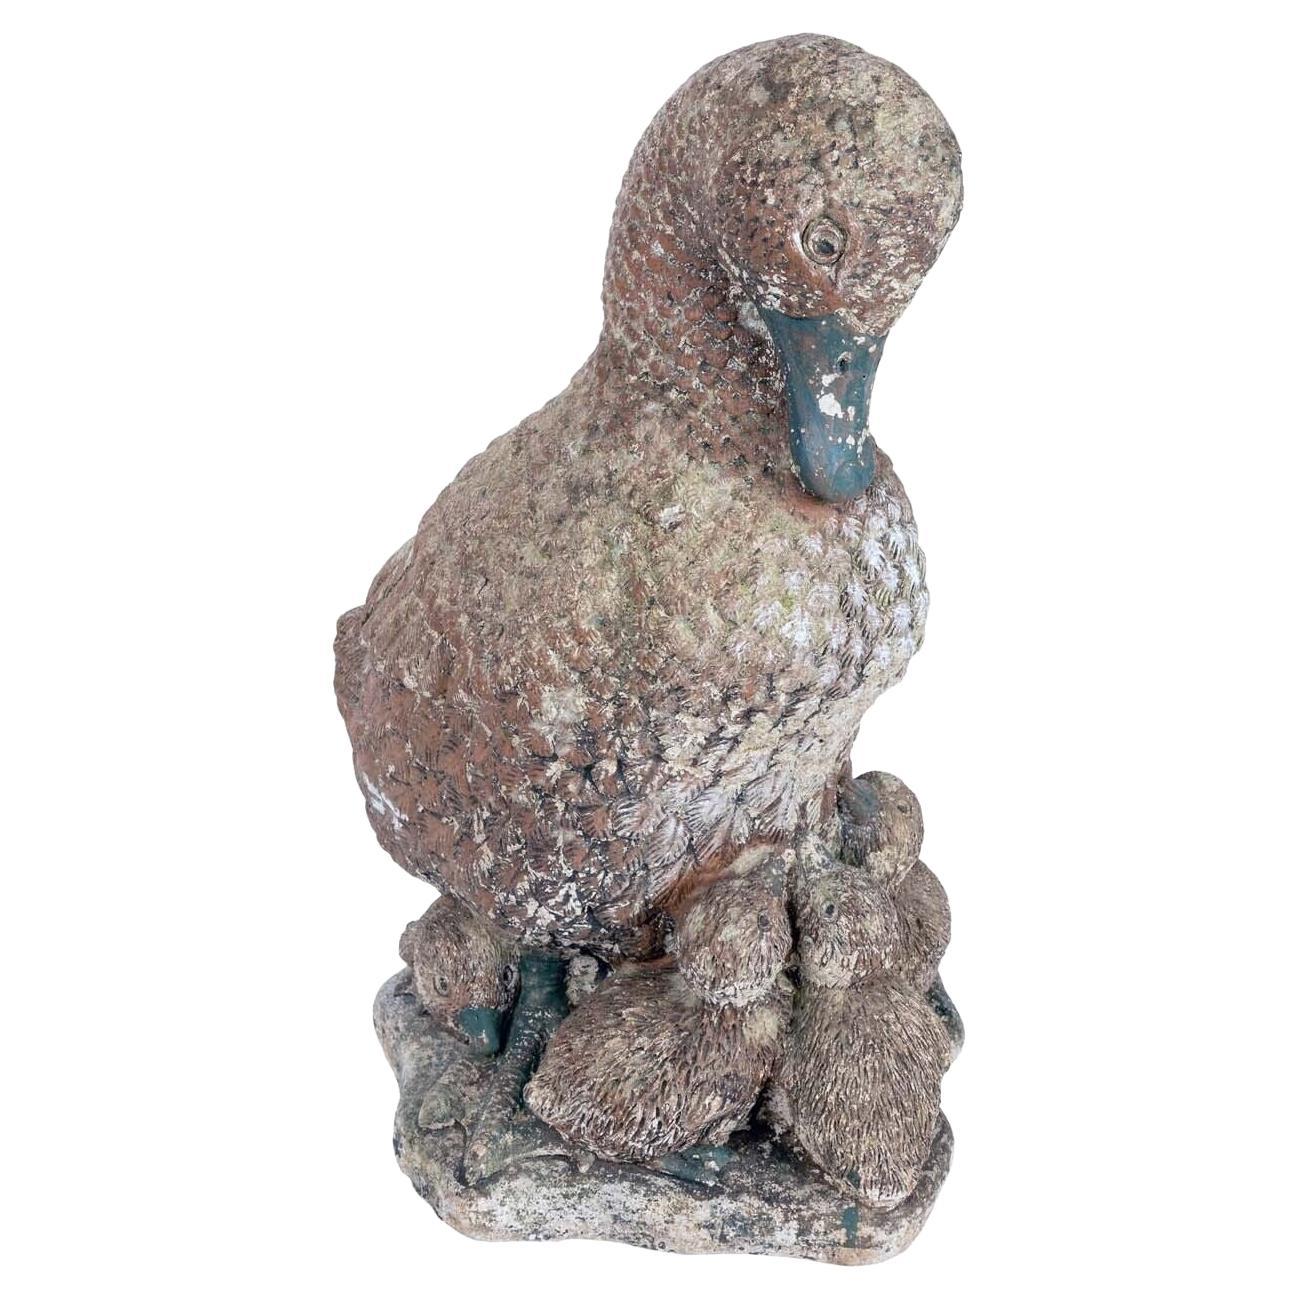 Concrete Duck and Ducklings Garden Ornament, French 20th Century